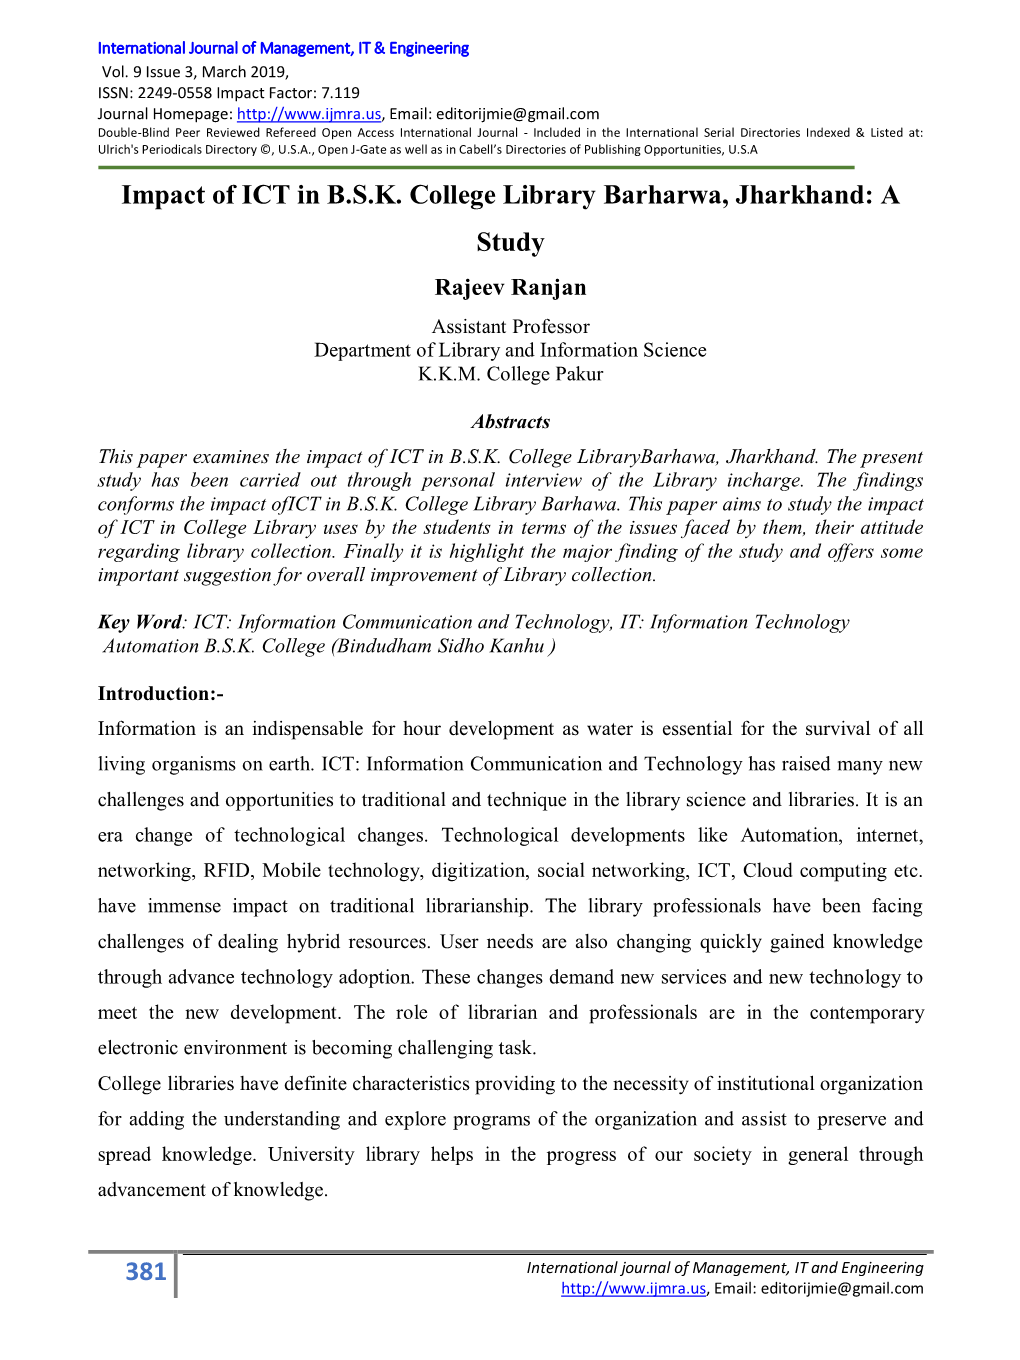 381 Impact of ICT in B.S.K. College Library Barharwa, Jharkhand: a Study